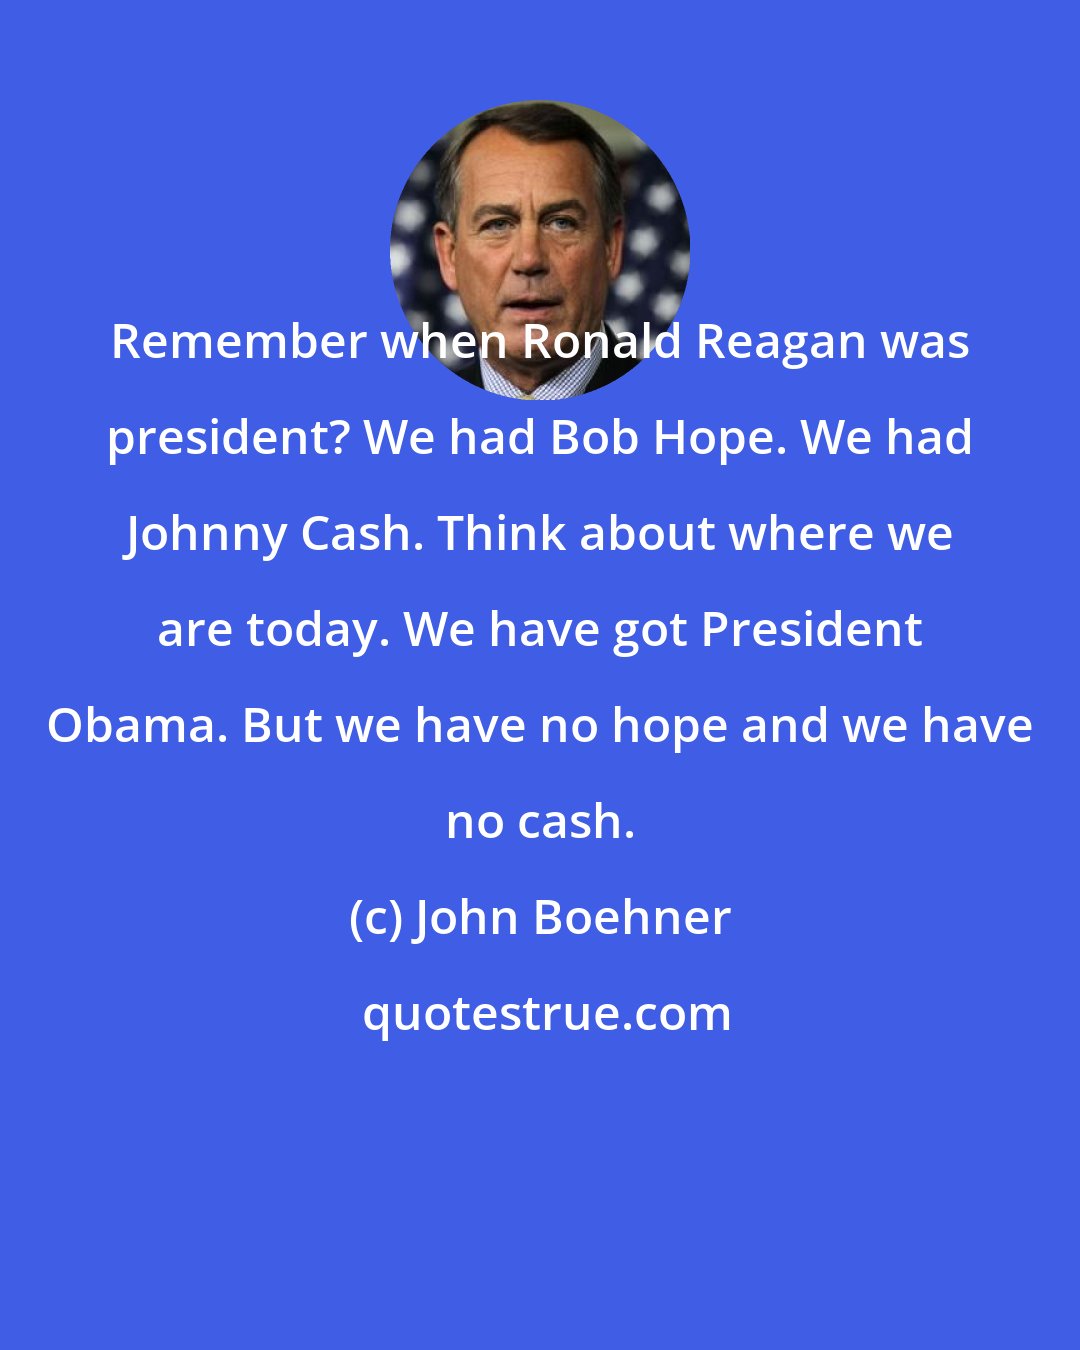 John Boehner: Remember when Ronald Reagan was president? We had Bob Hope. We had Johnny Cash. Think about where we are today. We have got President Obama. But we have no hope and we have no cash.